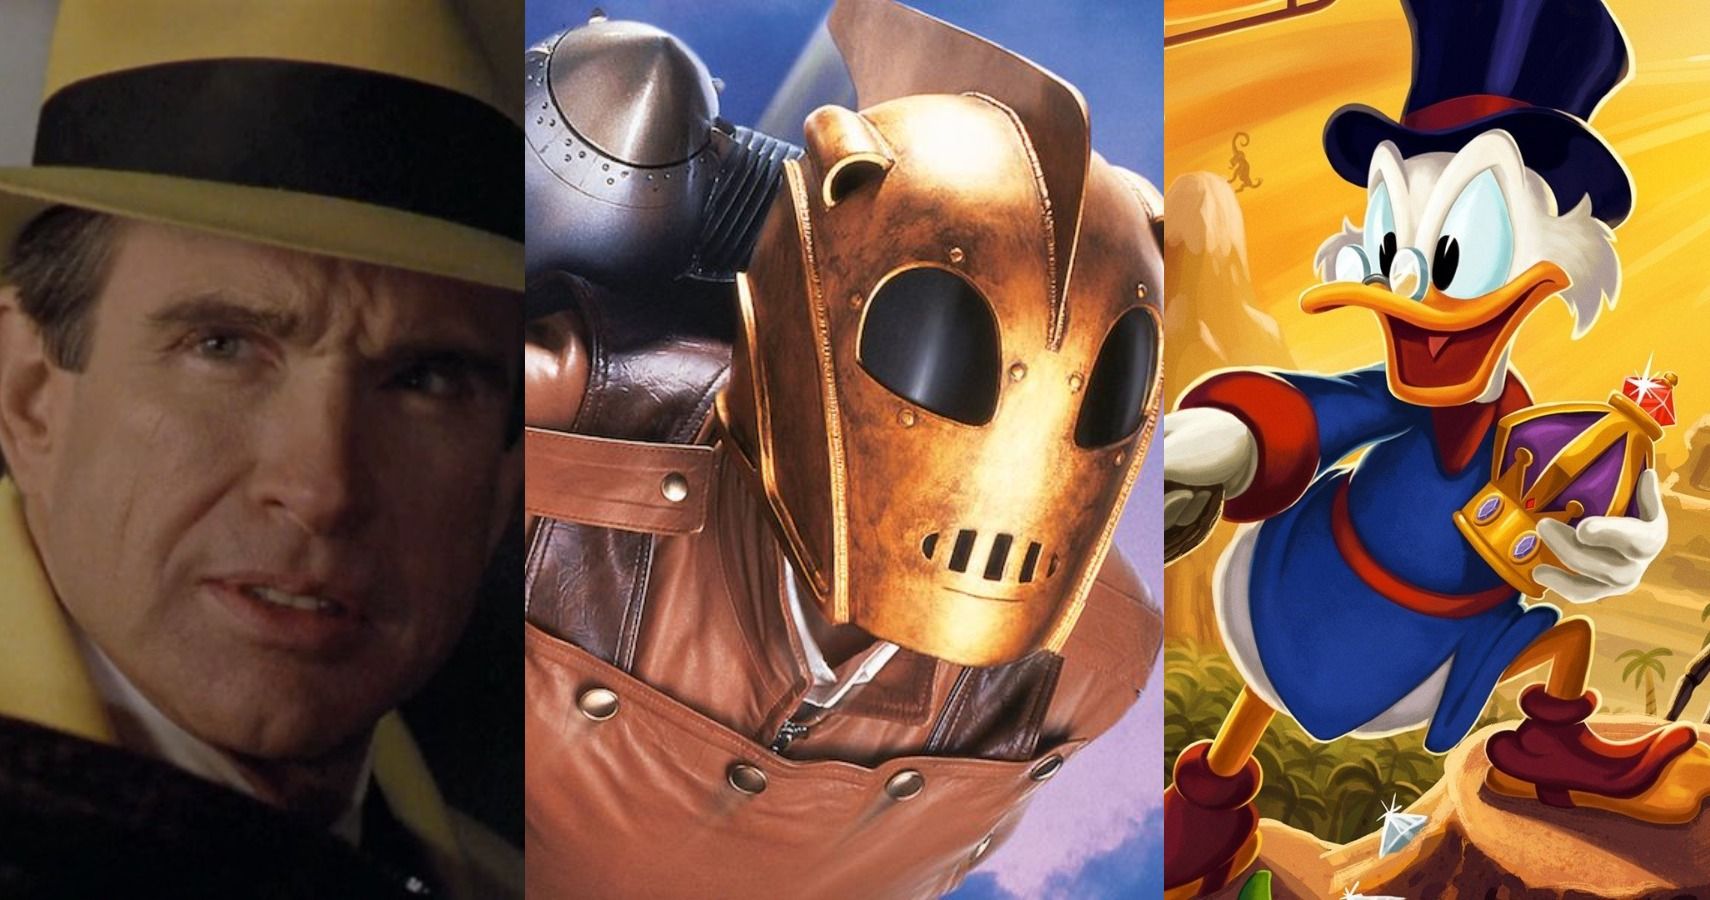 A combined feature image featuring three comic book adaptations made before Disney bought Marvel Studios: Dick Tracy, The Rocketeer, and DuckTales.